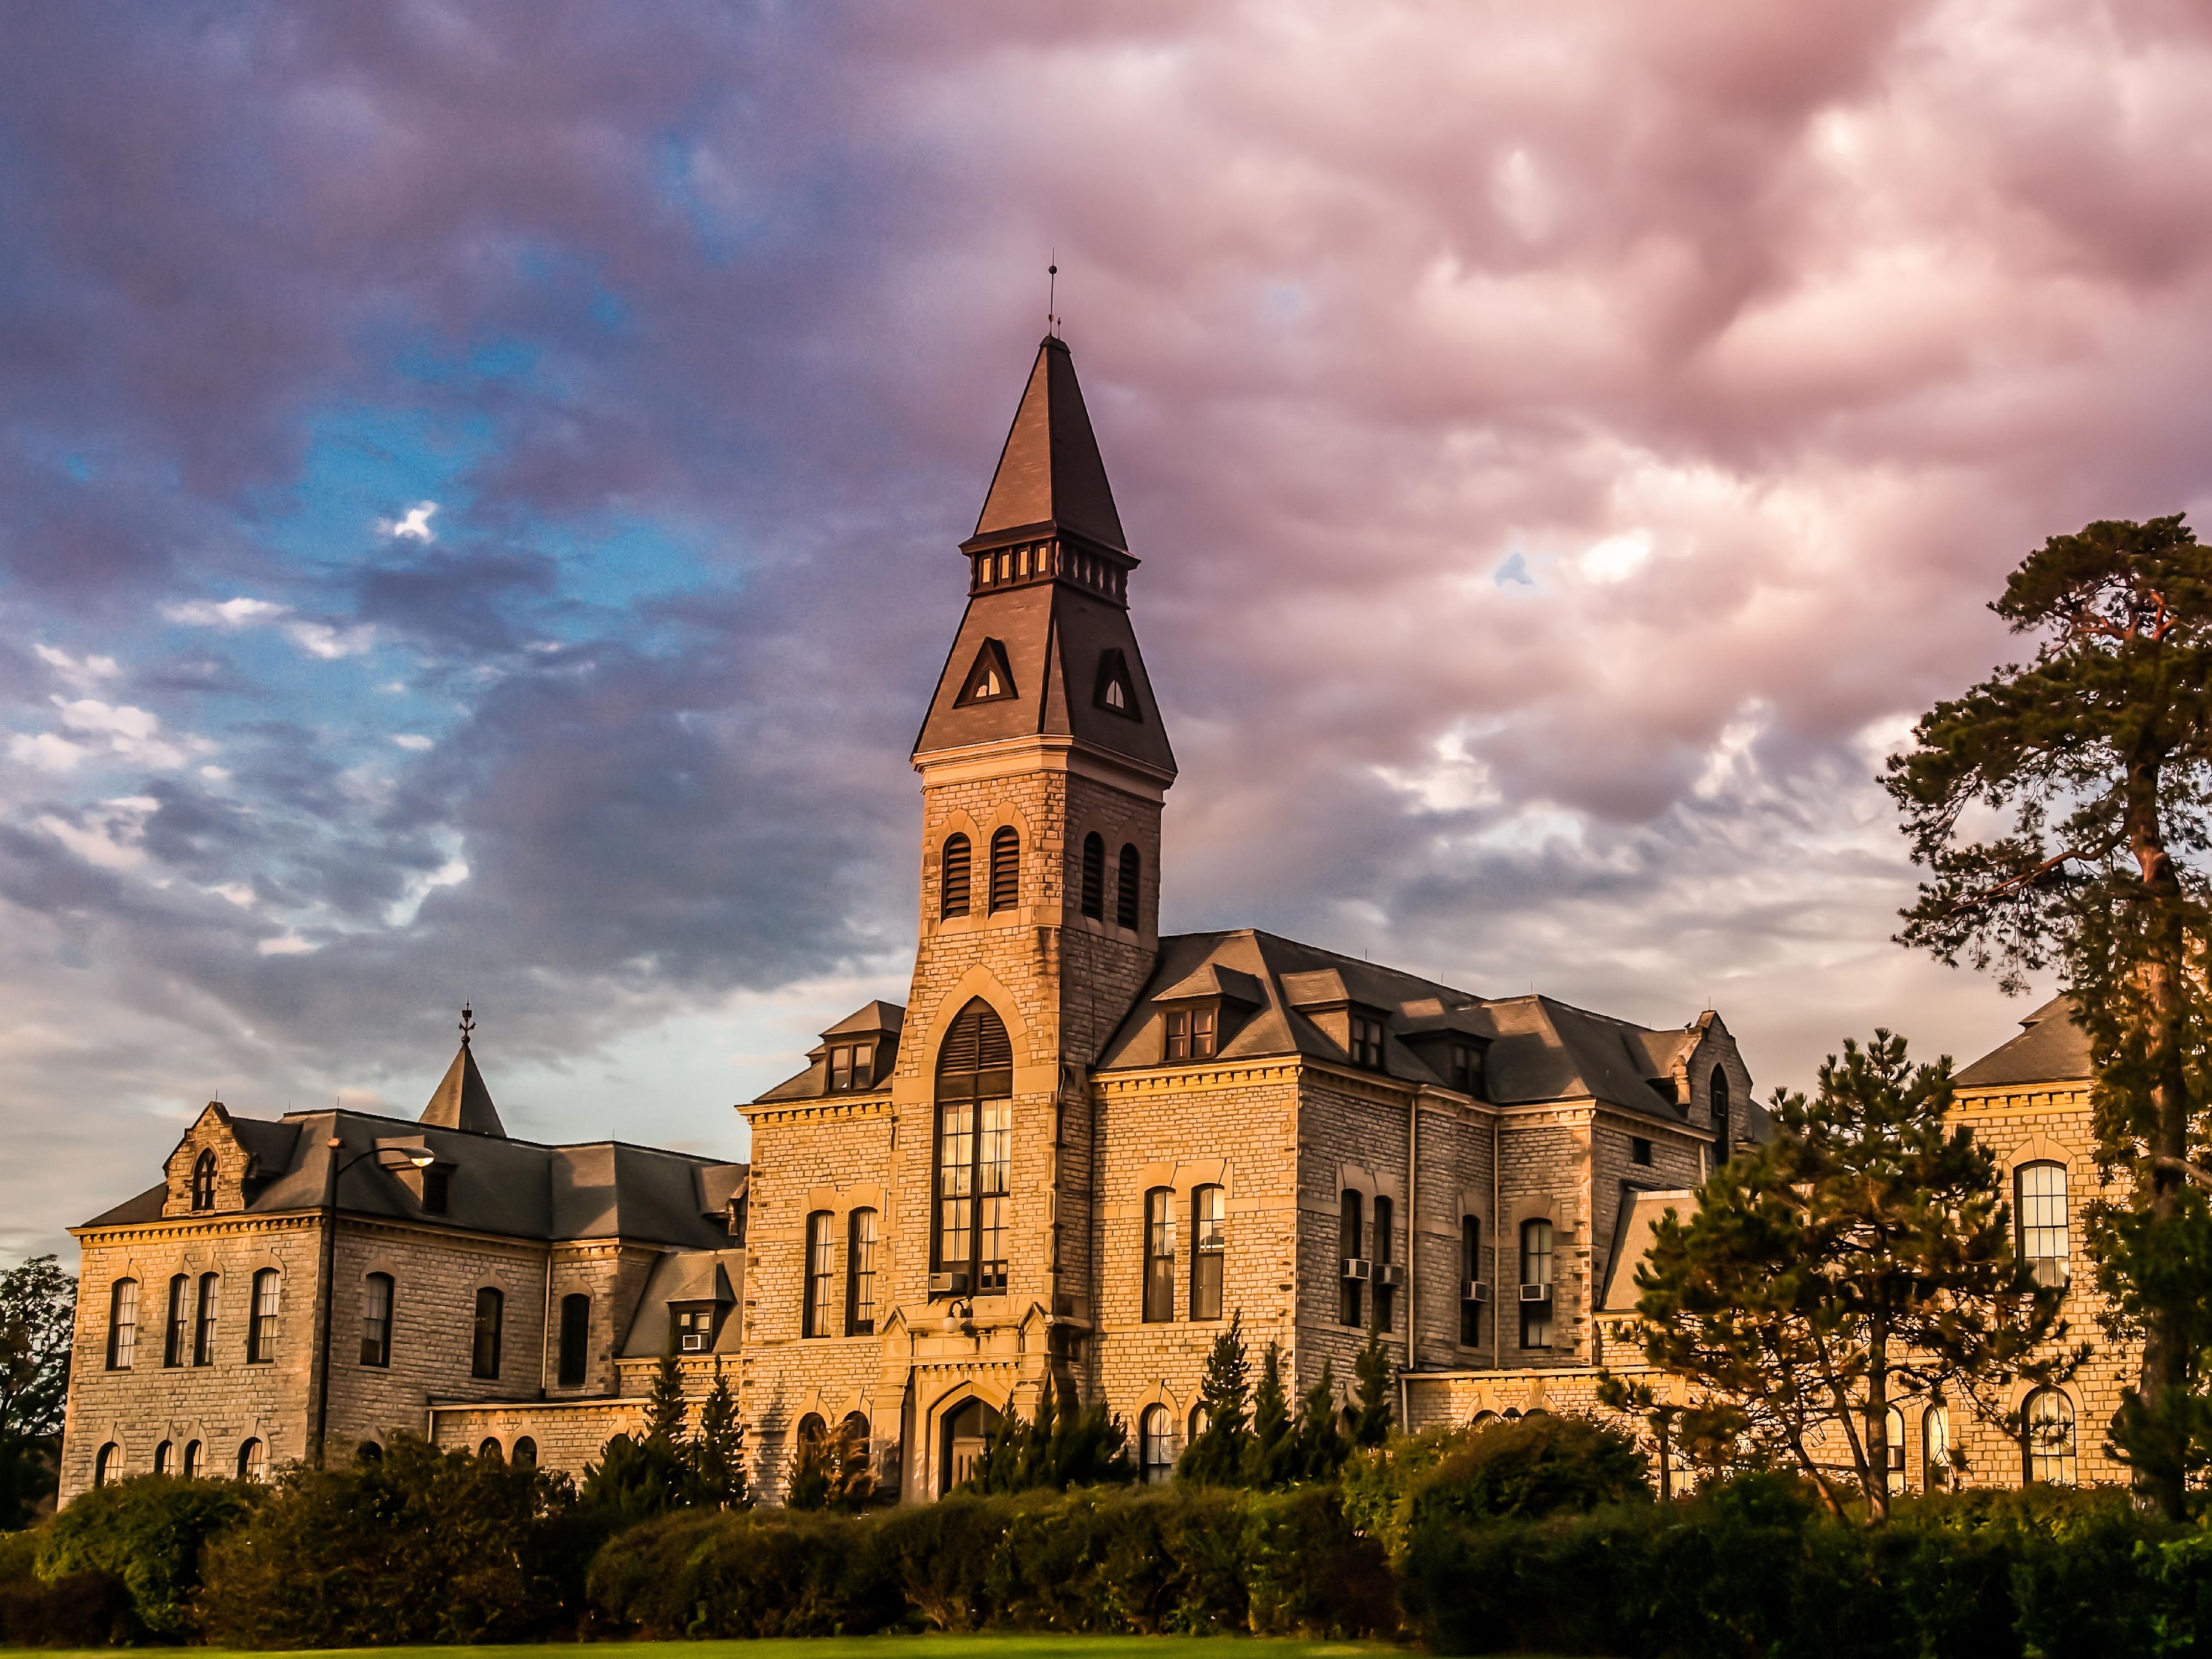 Come stay at the Holiday Inn At The Manhattan Campus located on the Campus of Kansas State University! If you don't want to drive while you are coming for a game or to visit campus, our hotel is within walking distance of both the University and Aggieville.